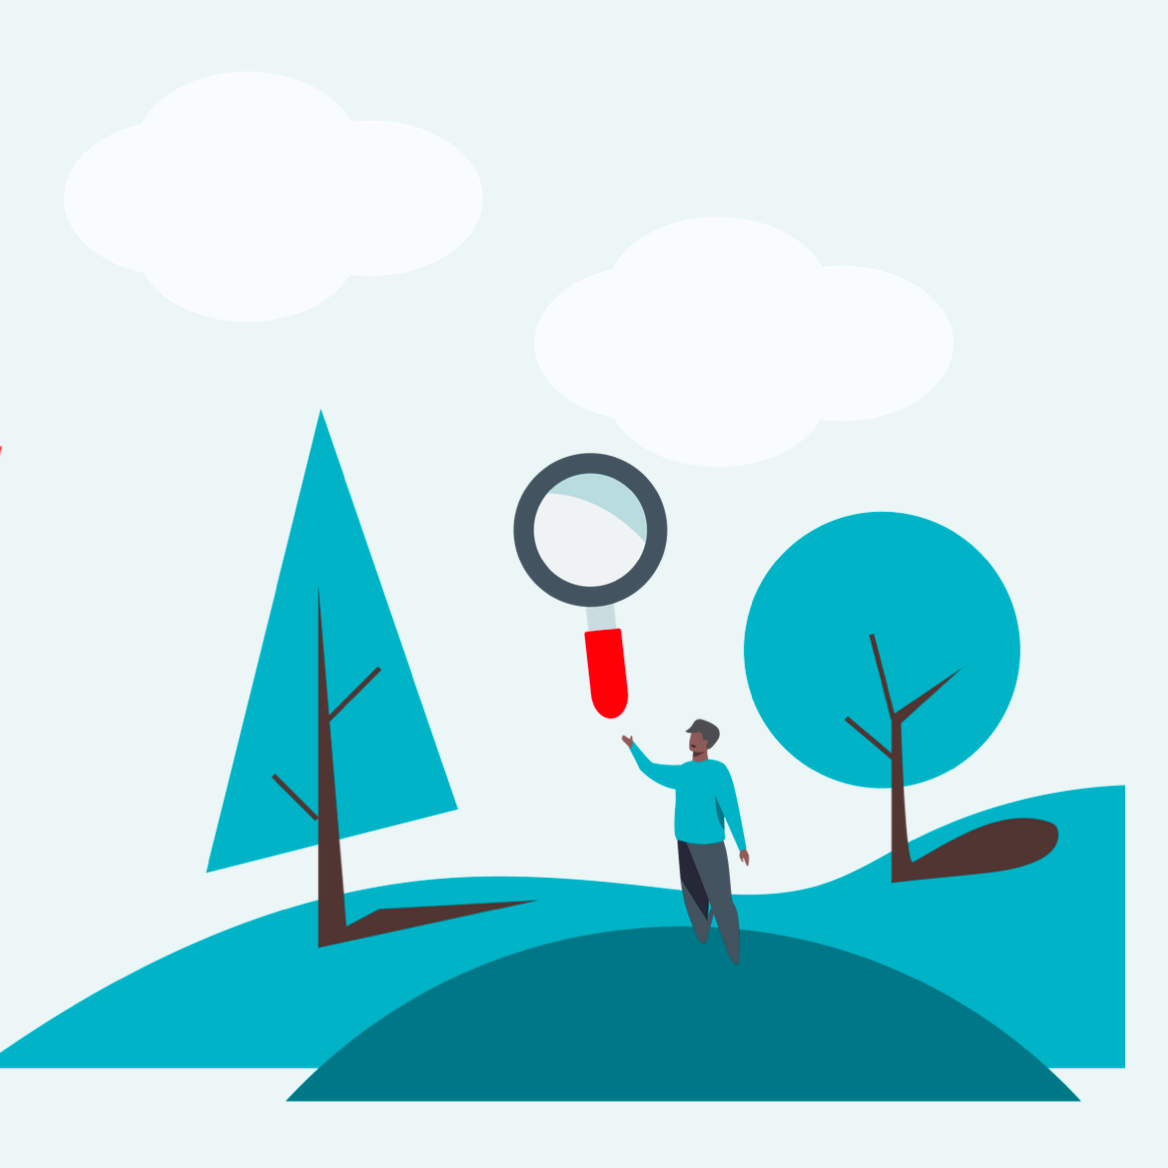 Against a pale grey sky and stylised vector design of trees, a man holds an oversized magnifying glass with a bright red handle up to the sky